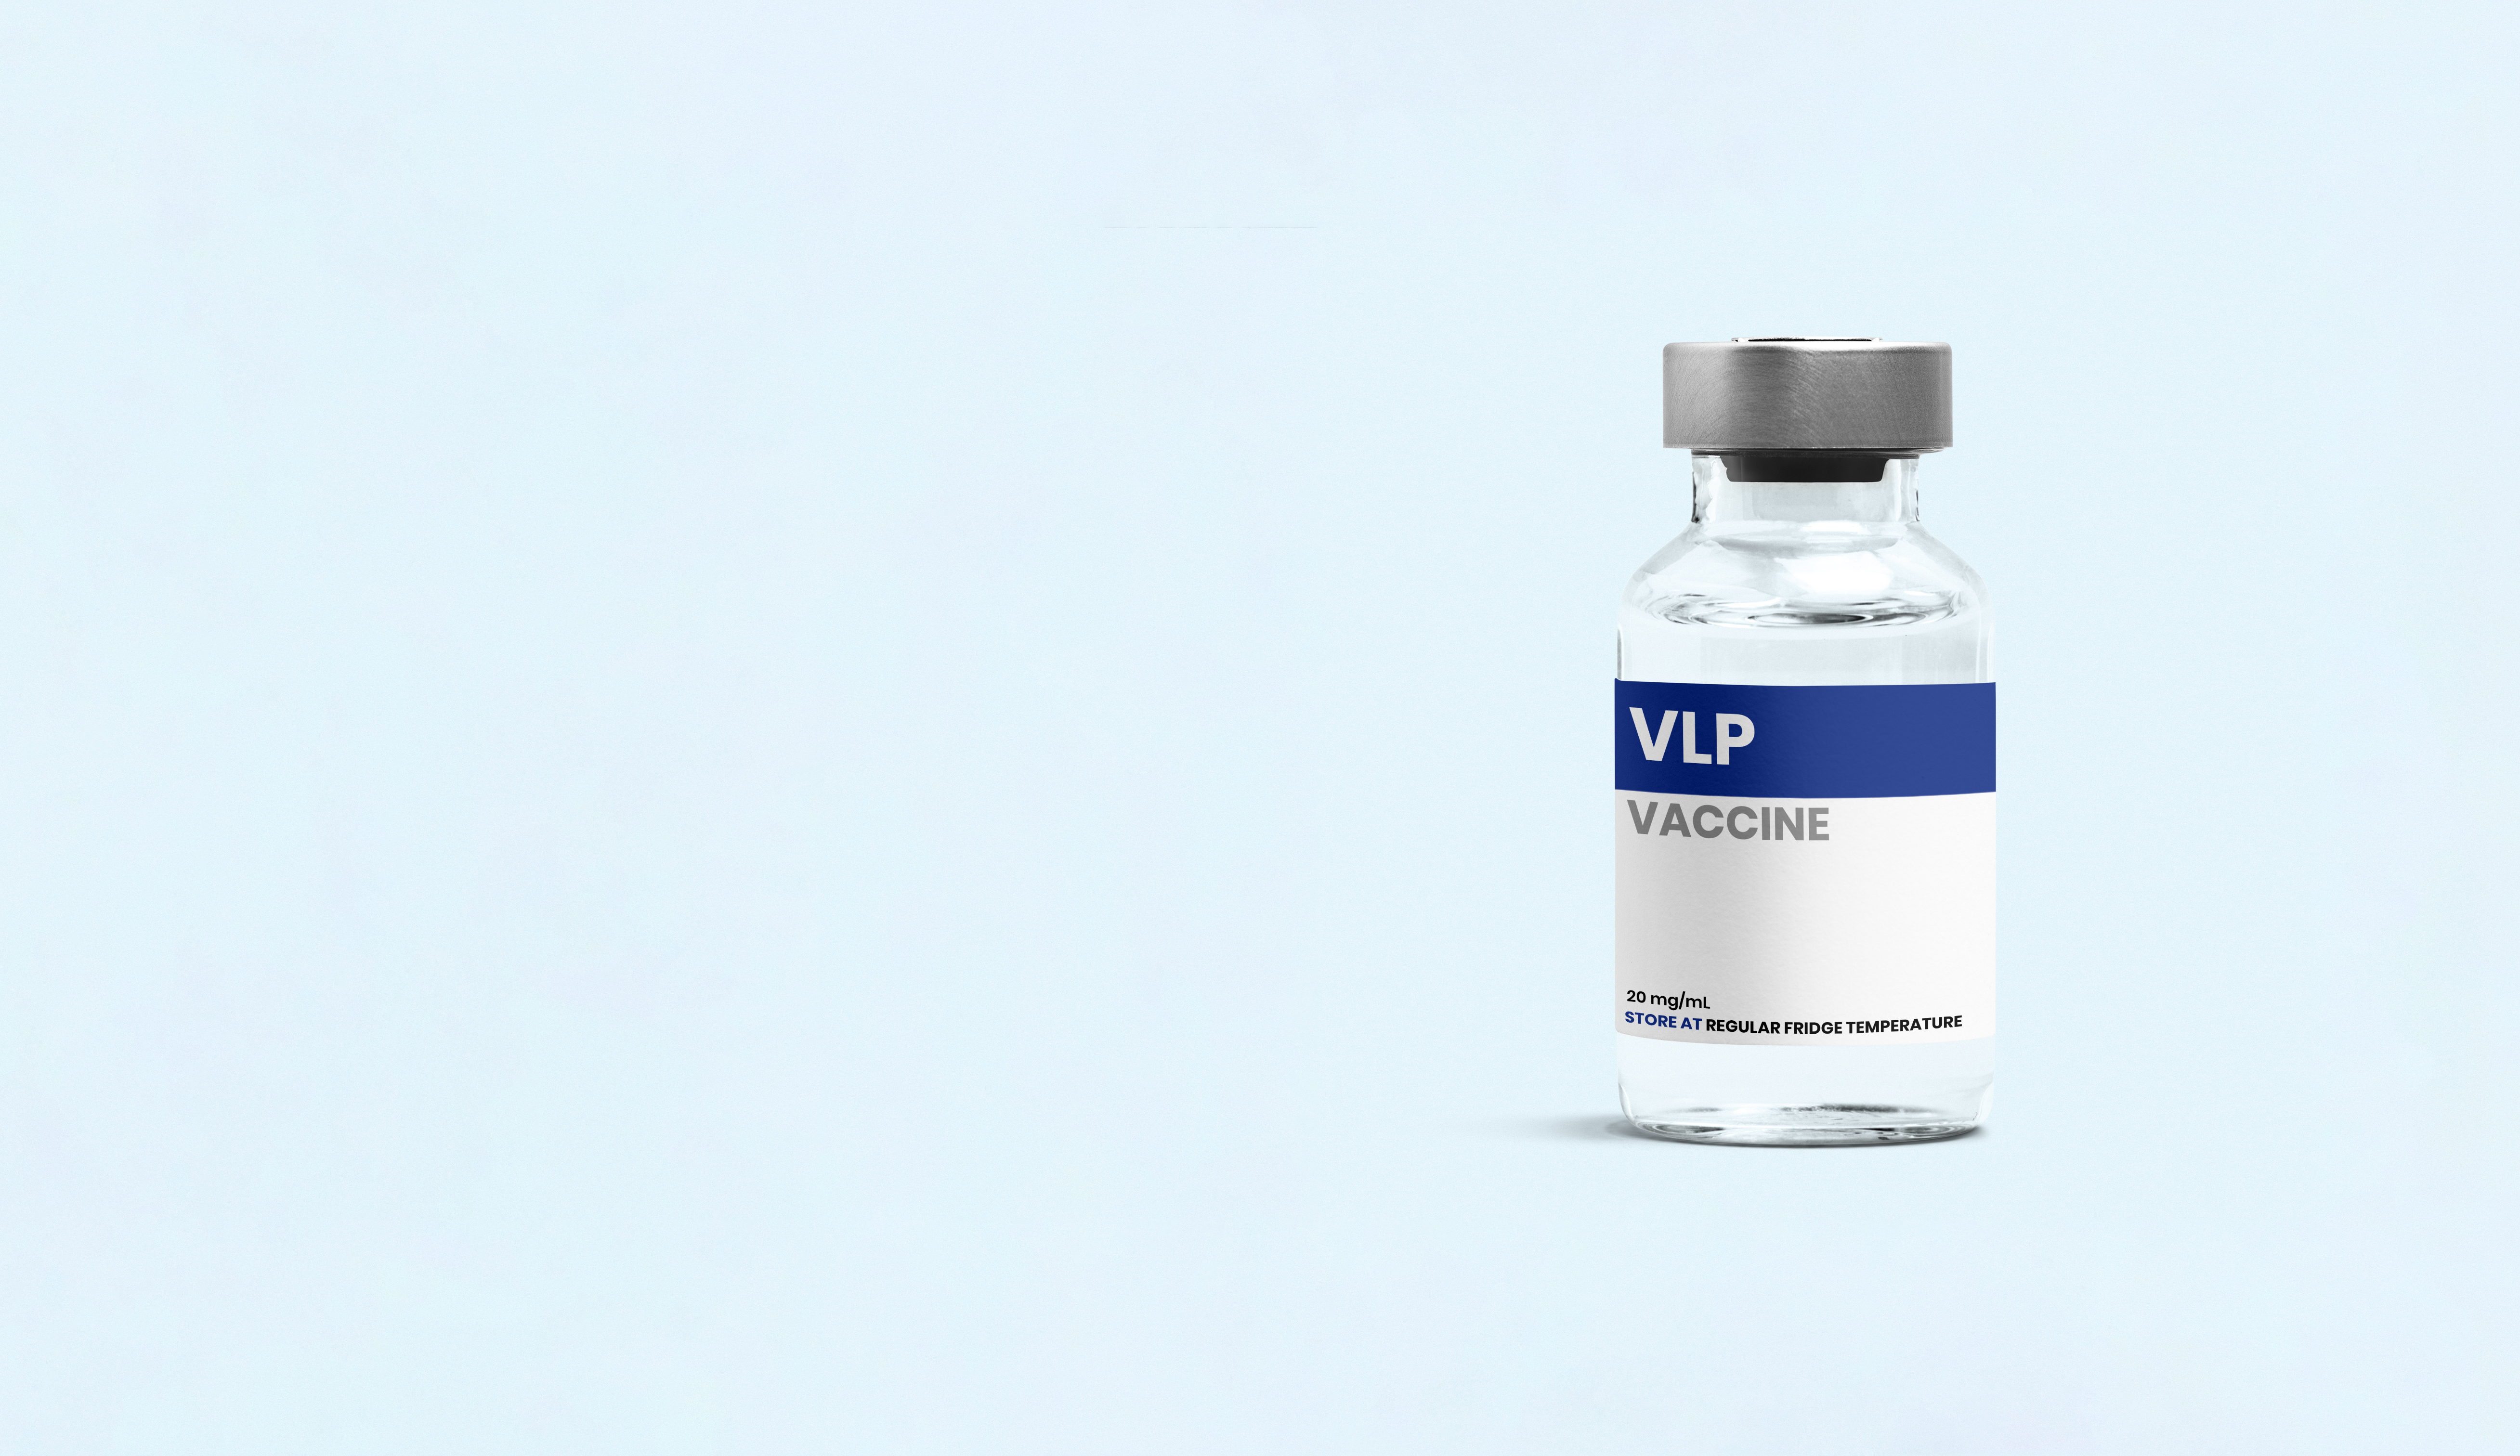 Premas Biotech’s D-crypt™ Platform for Virus Like Particles (VLPs) Based Vaccine Candidates